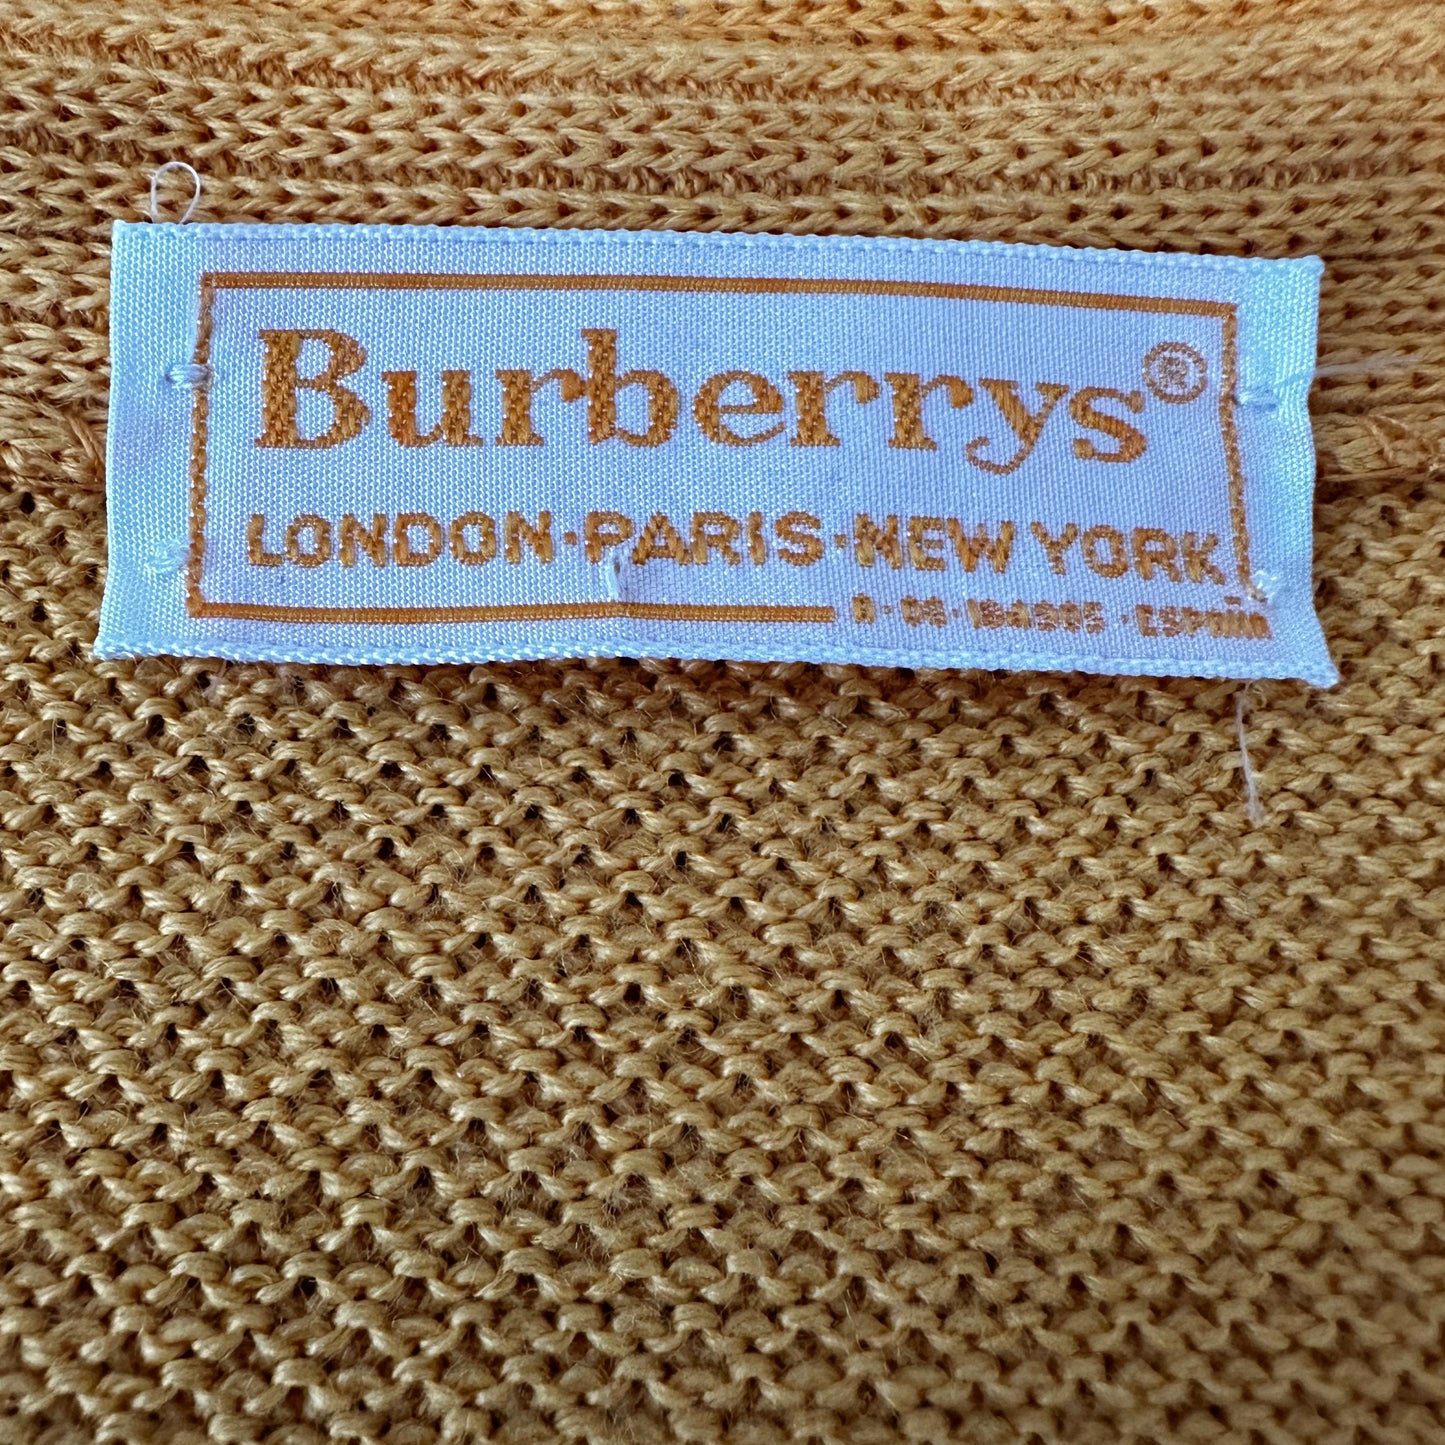 Burberrys Vintage 80s V-Neck Sweater Yellow - Deadstock - 5 / M - Made in Spain